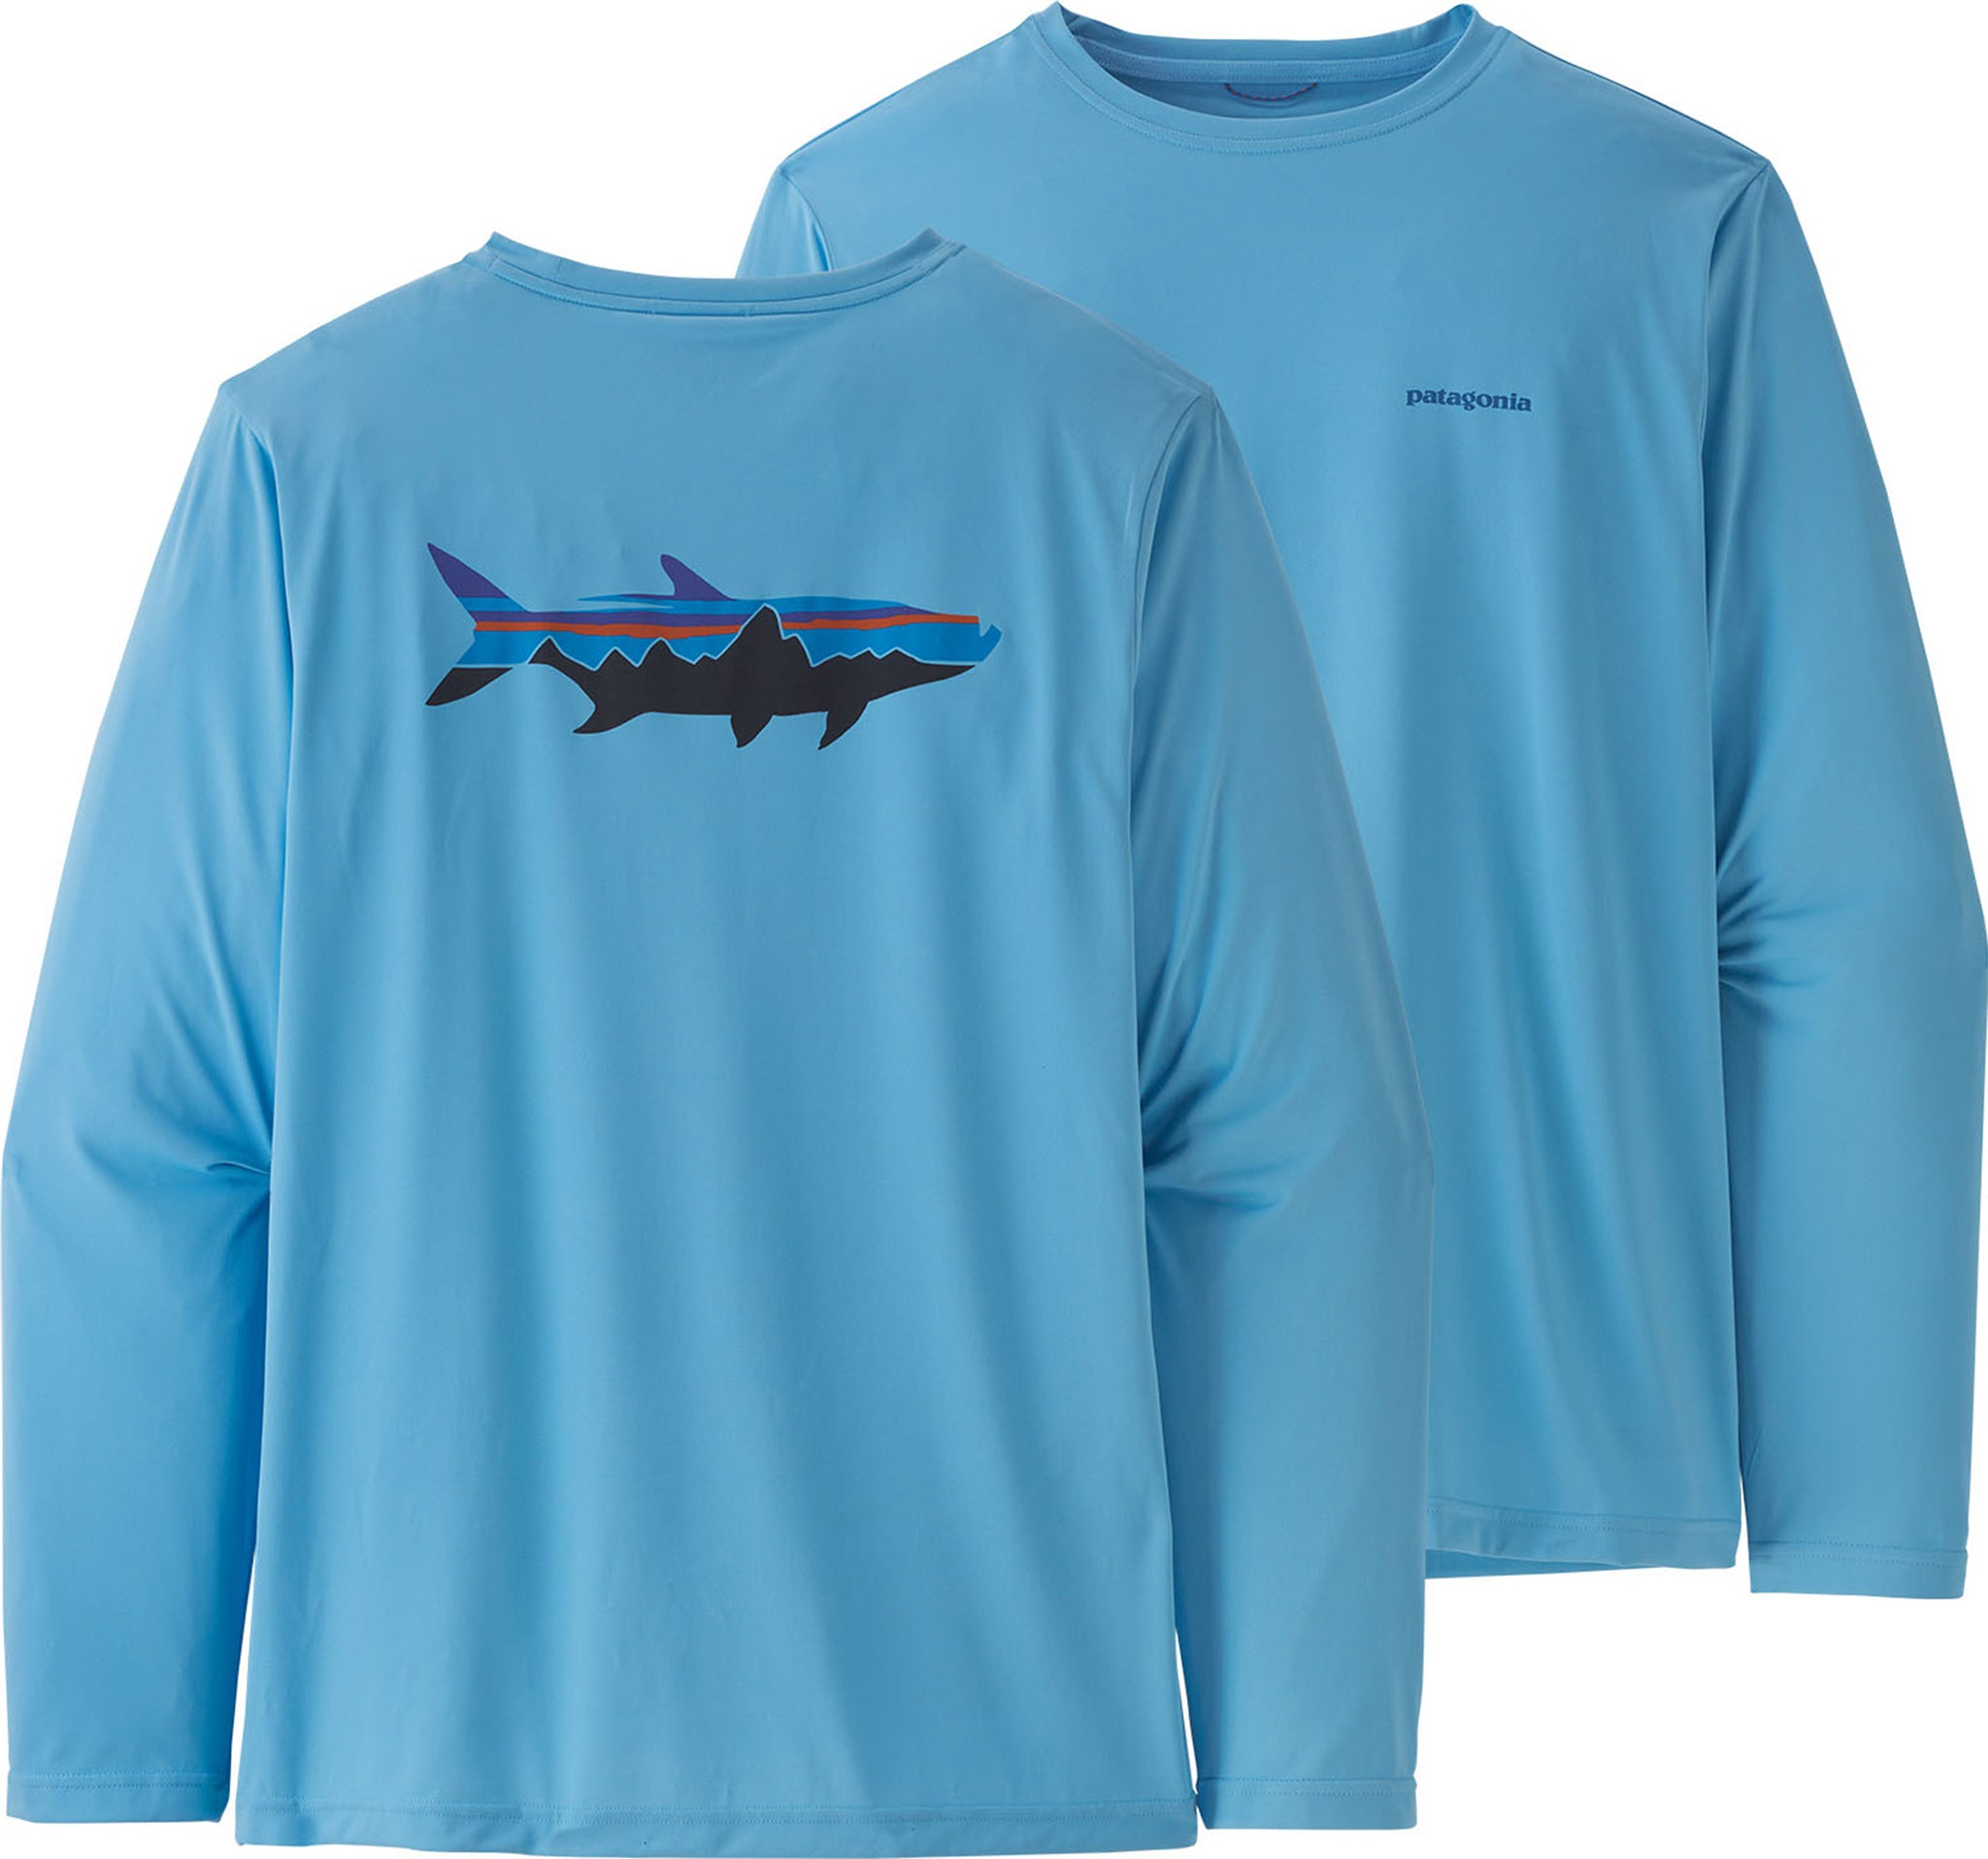 Patagonia Capilene Cool Daily Long-Sleeve Fish Graphic T-Shirt - Men's